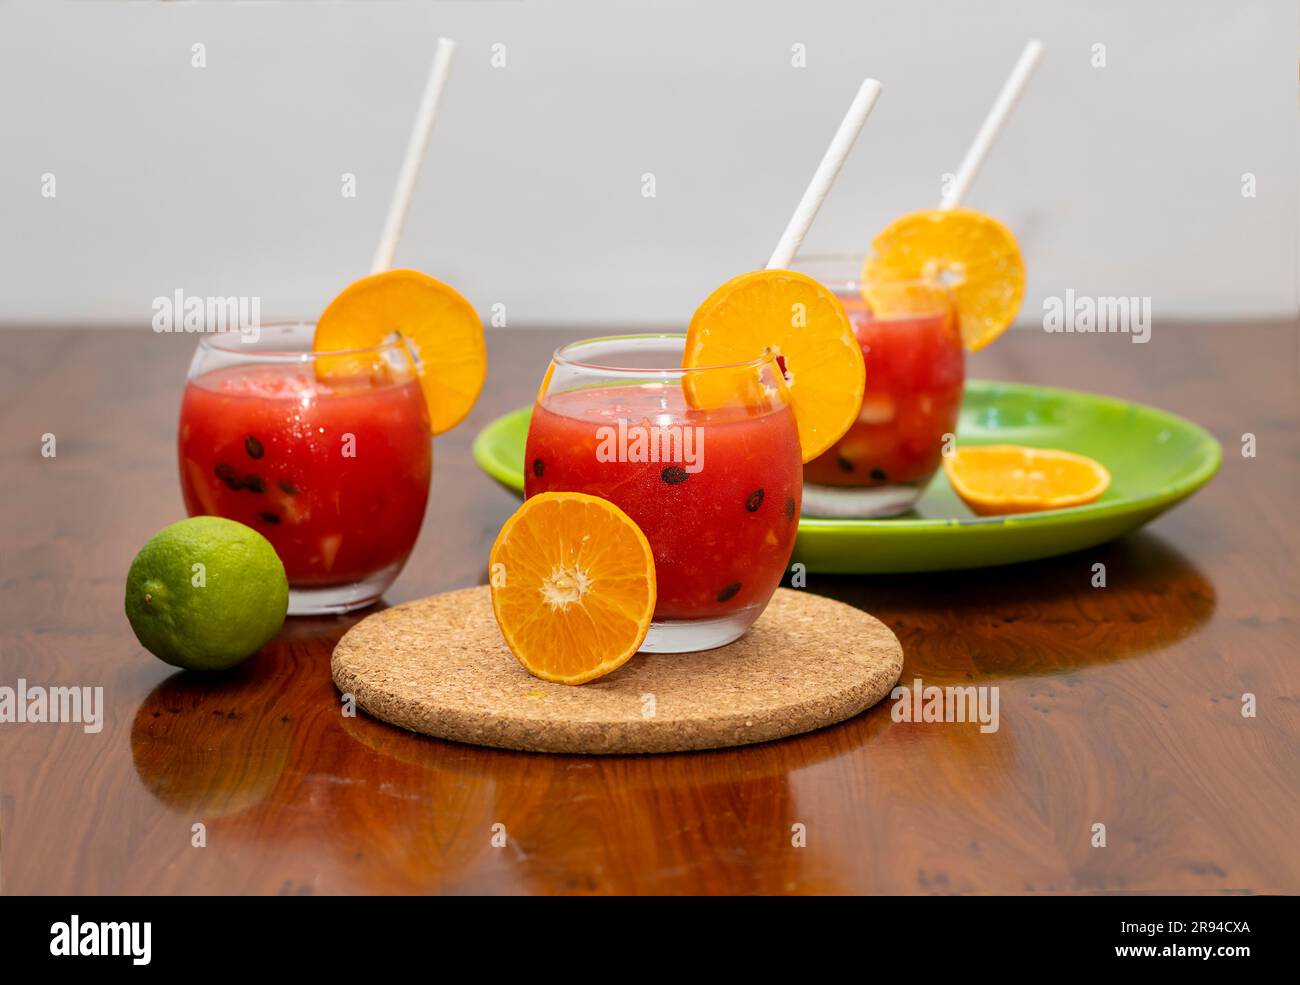 Closeup Image Of Fresh Watermelon Juice In Glass With Fruits Stock Photo